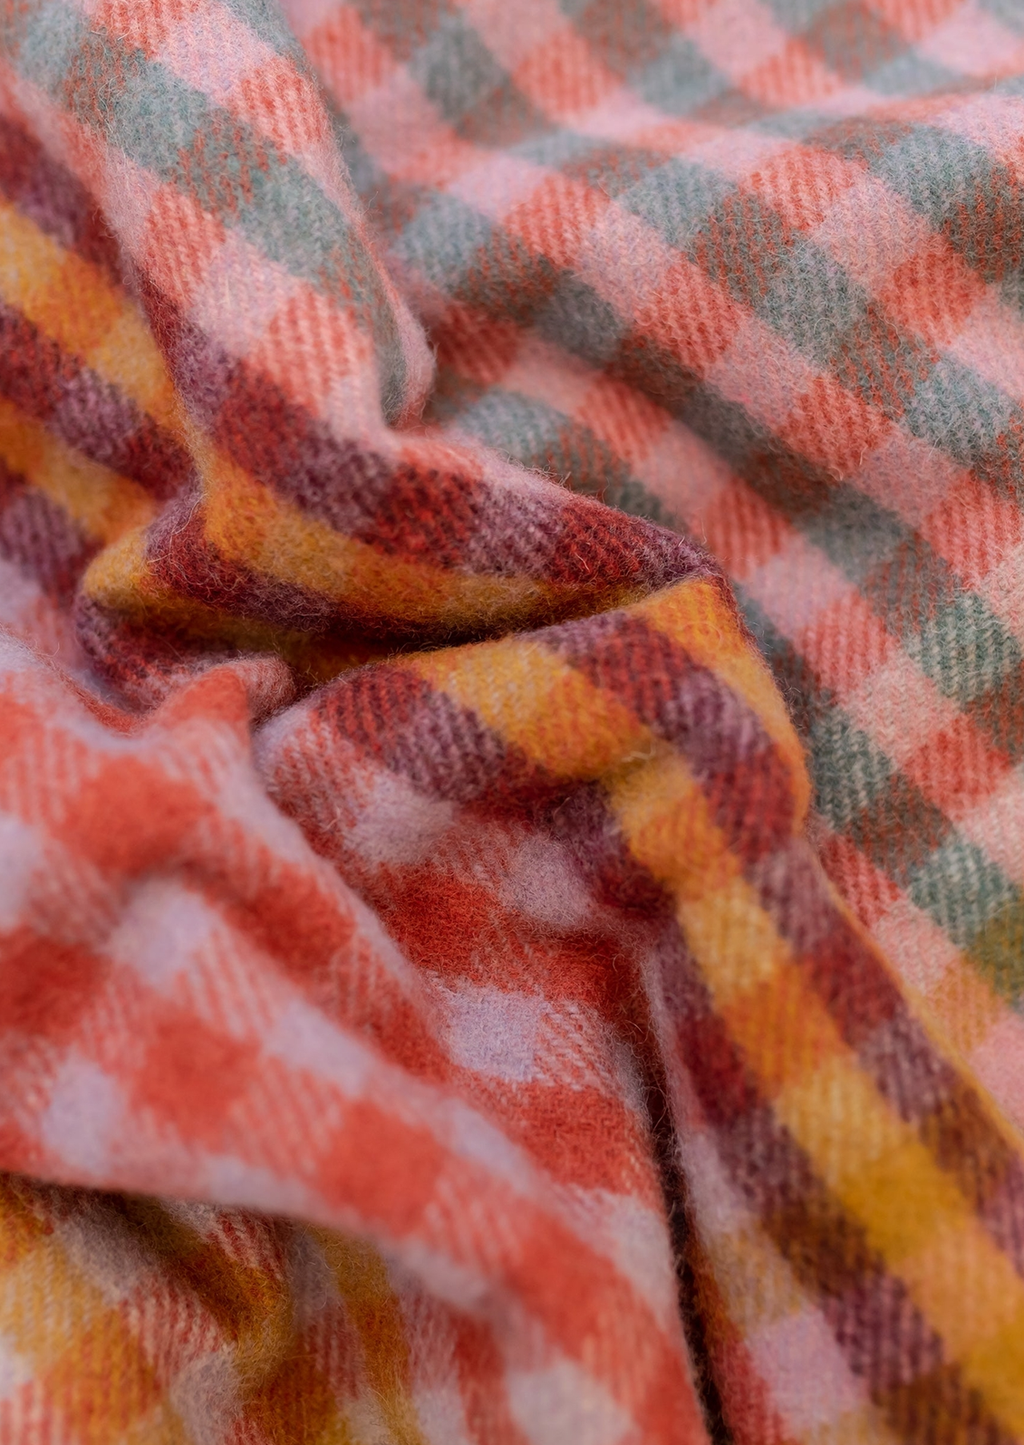 2: A colorful gingham check blanket in tones of lilac, magenta, and yellow.